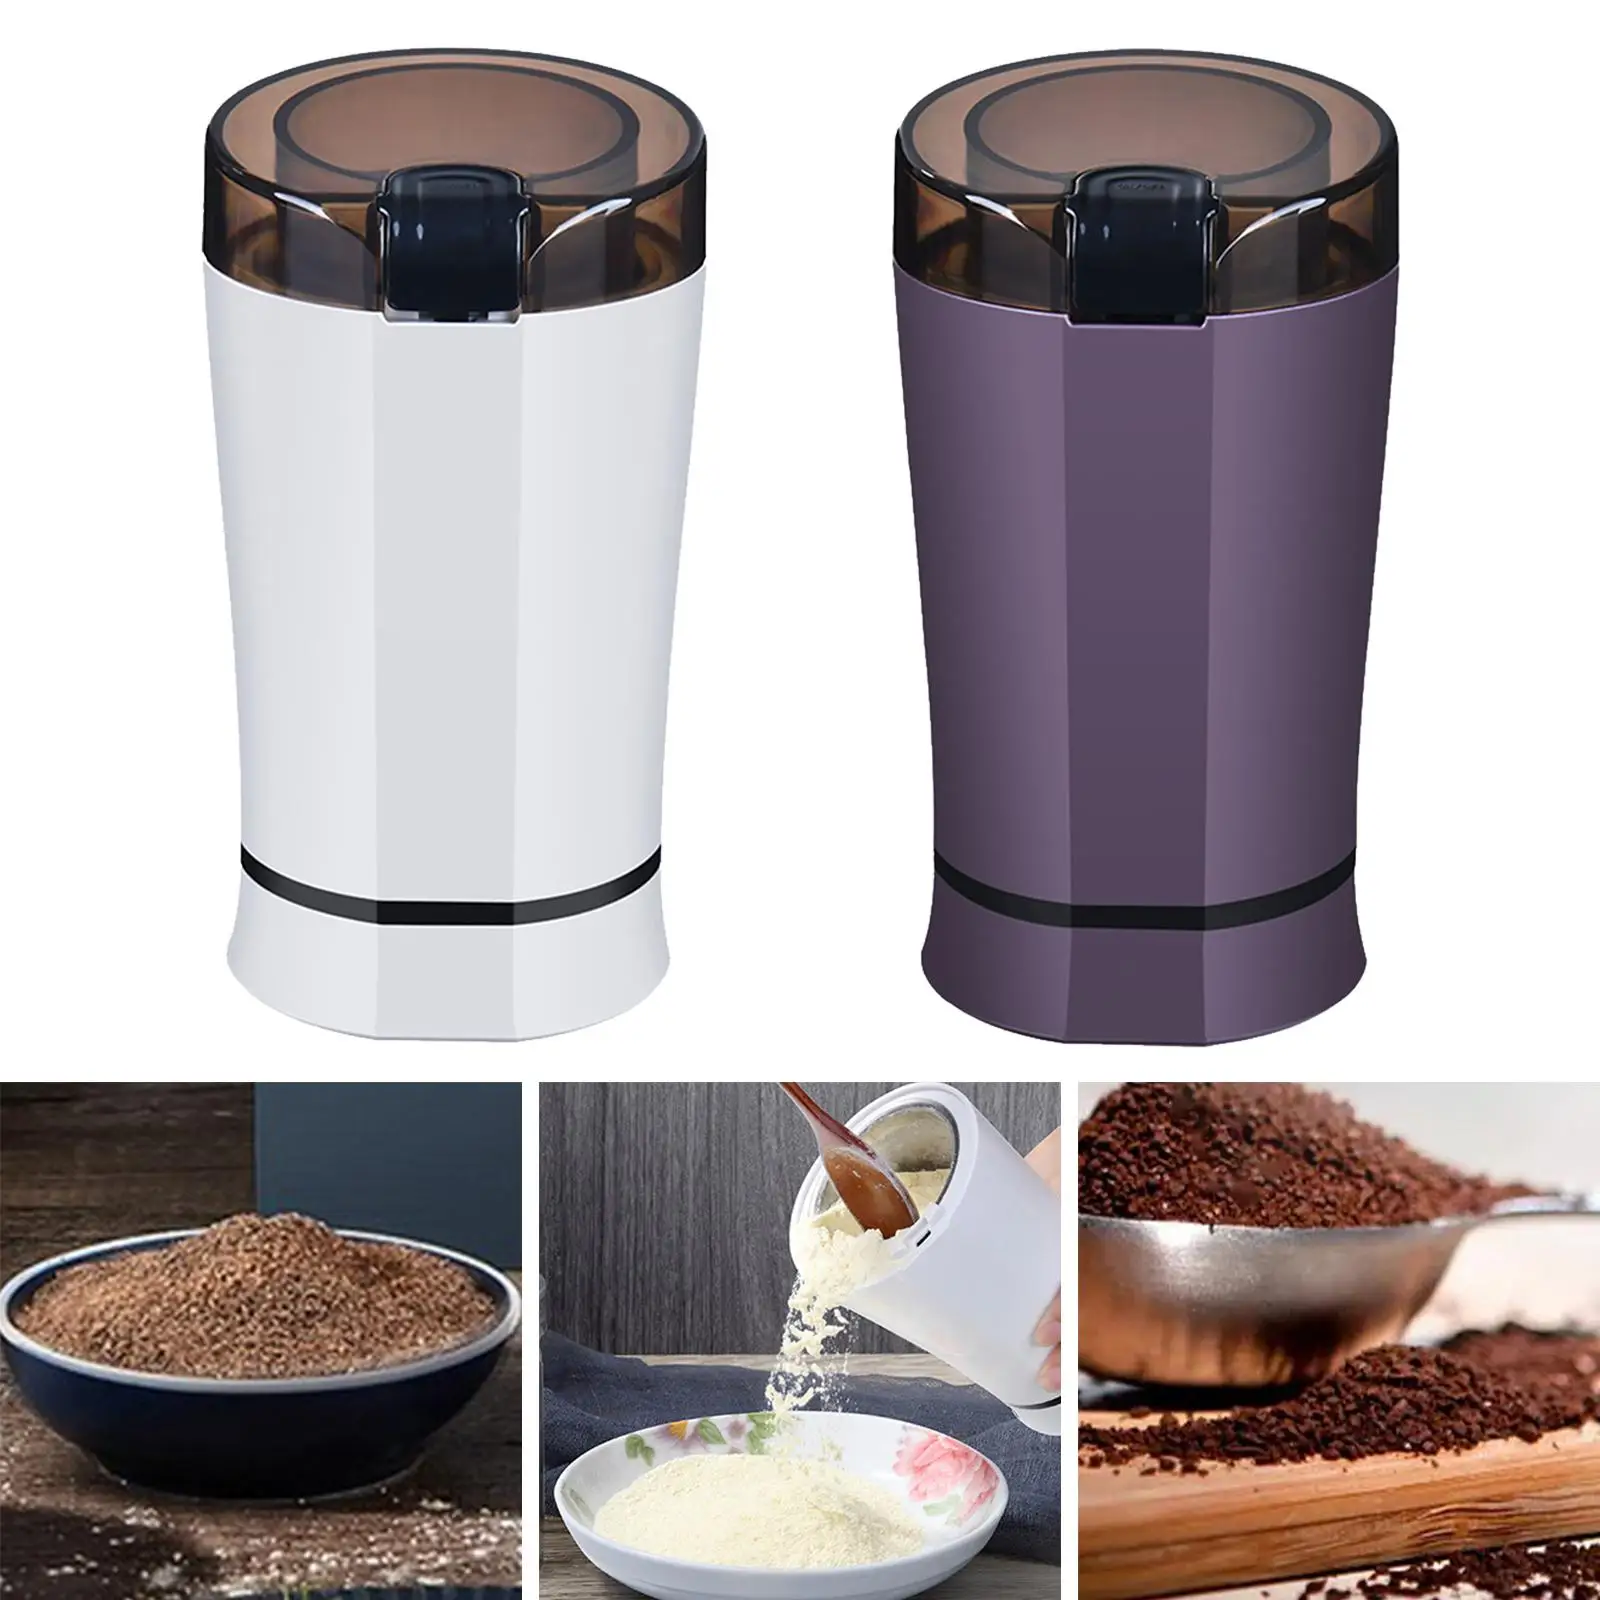 Multifunctional Electric Grinding Machine Kitchen Grain Mill 110V Coffee Bean for Grains Seeds Peanut Coffee bean